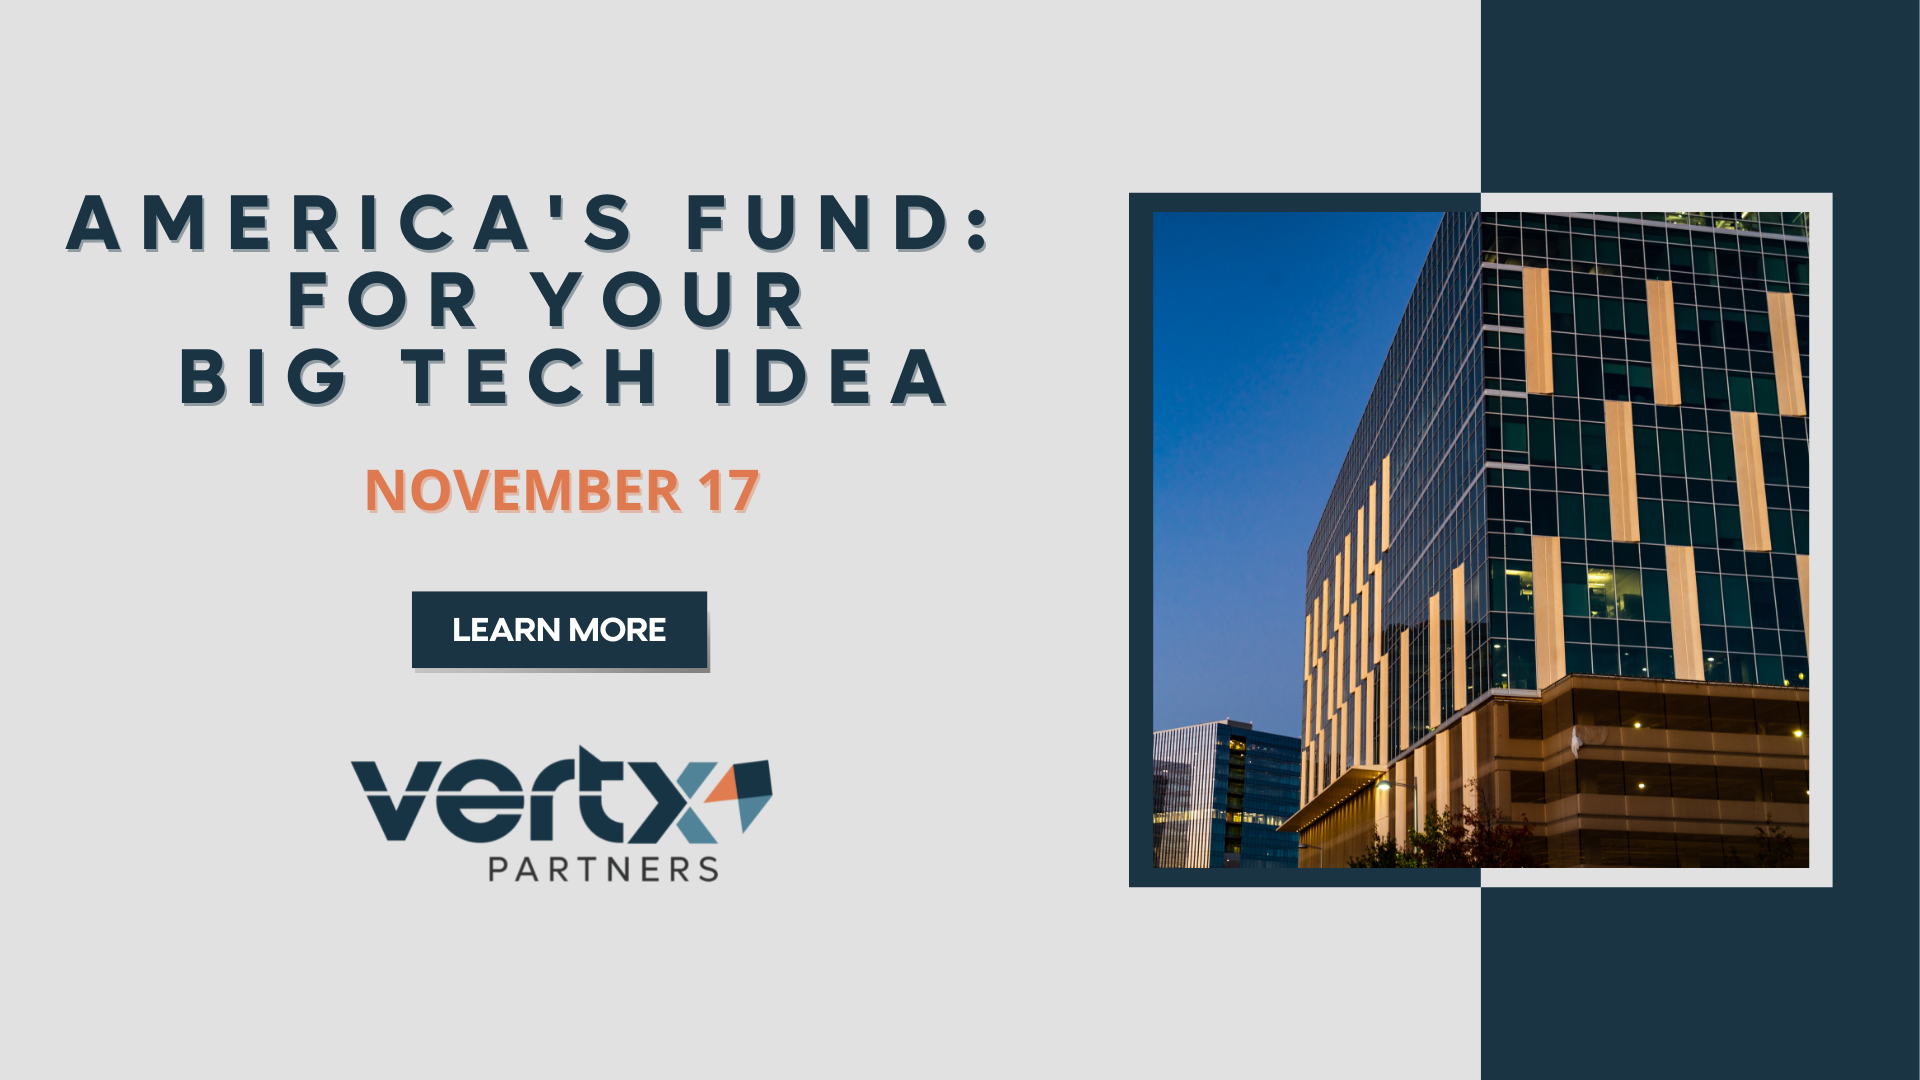 The graphic contains the title "Americas Seed Fund: For Your Big Tech Idea" with the date November 17th below it. To the right of the title is an image of a building at night with lights shining through the windows.